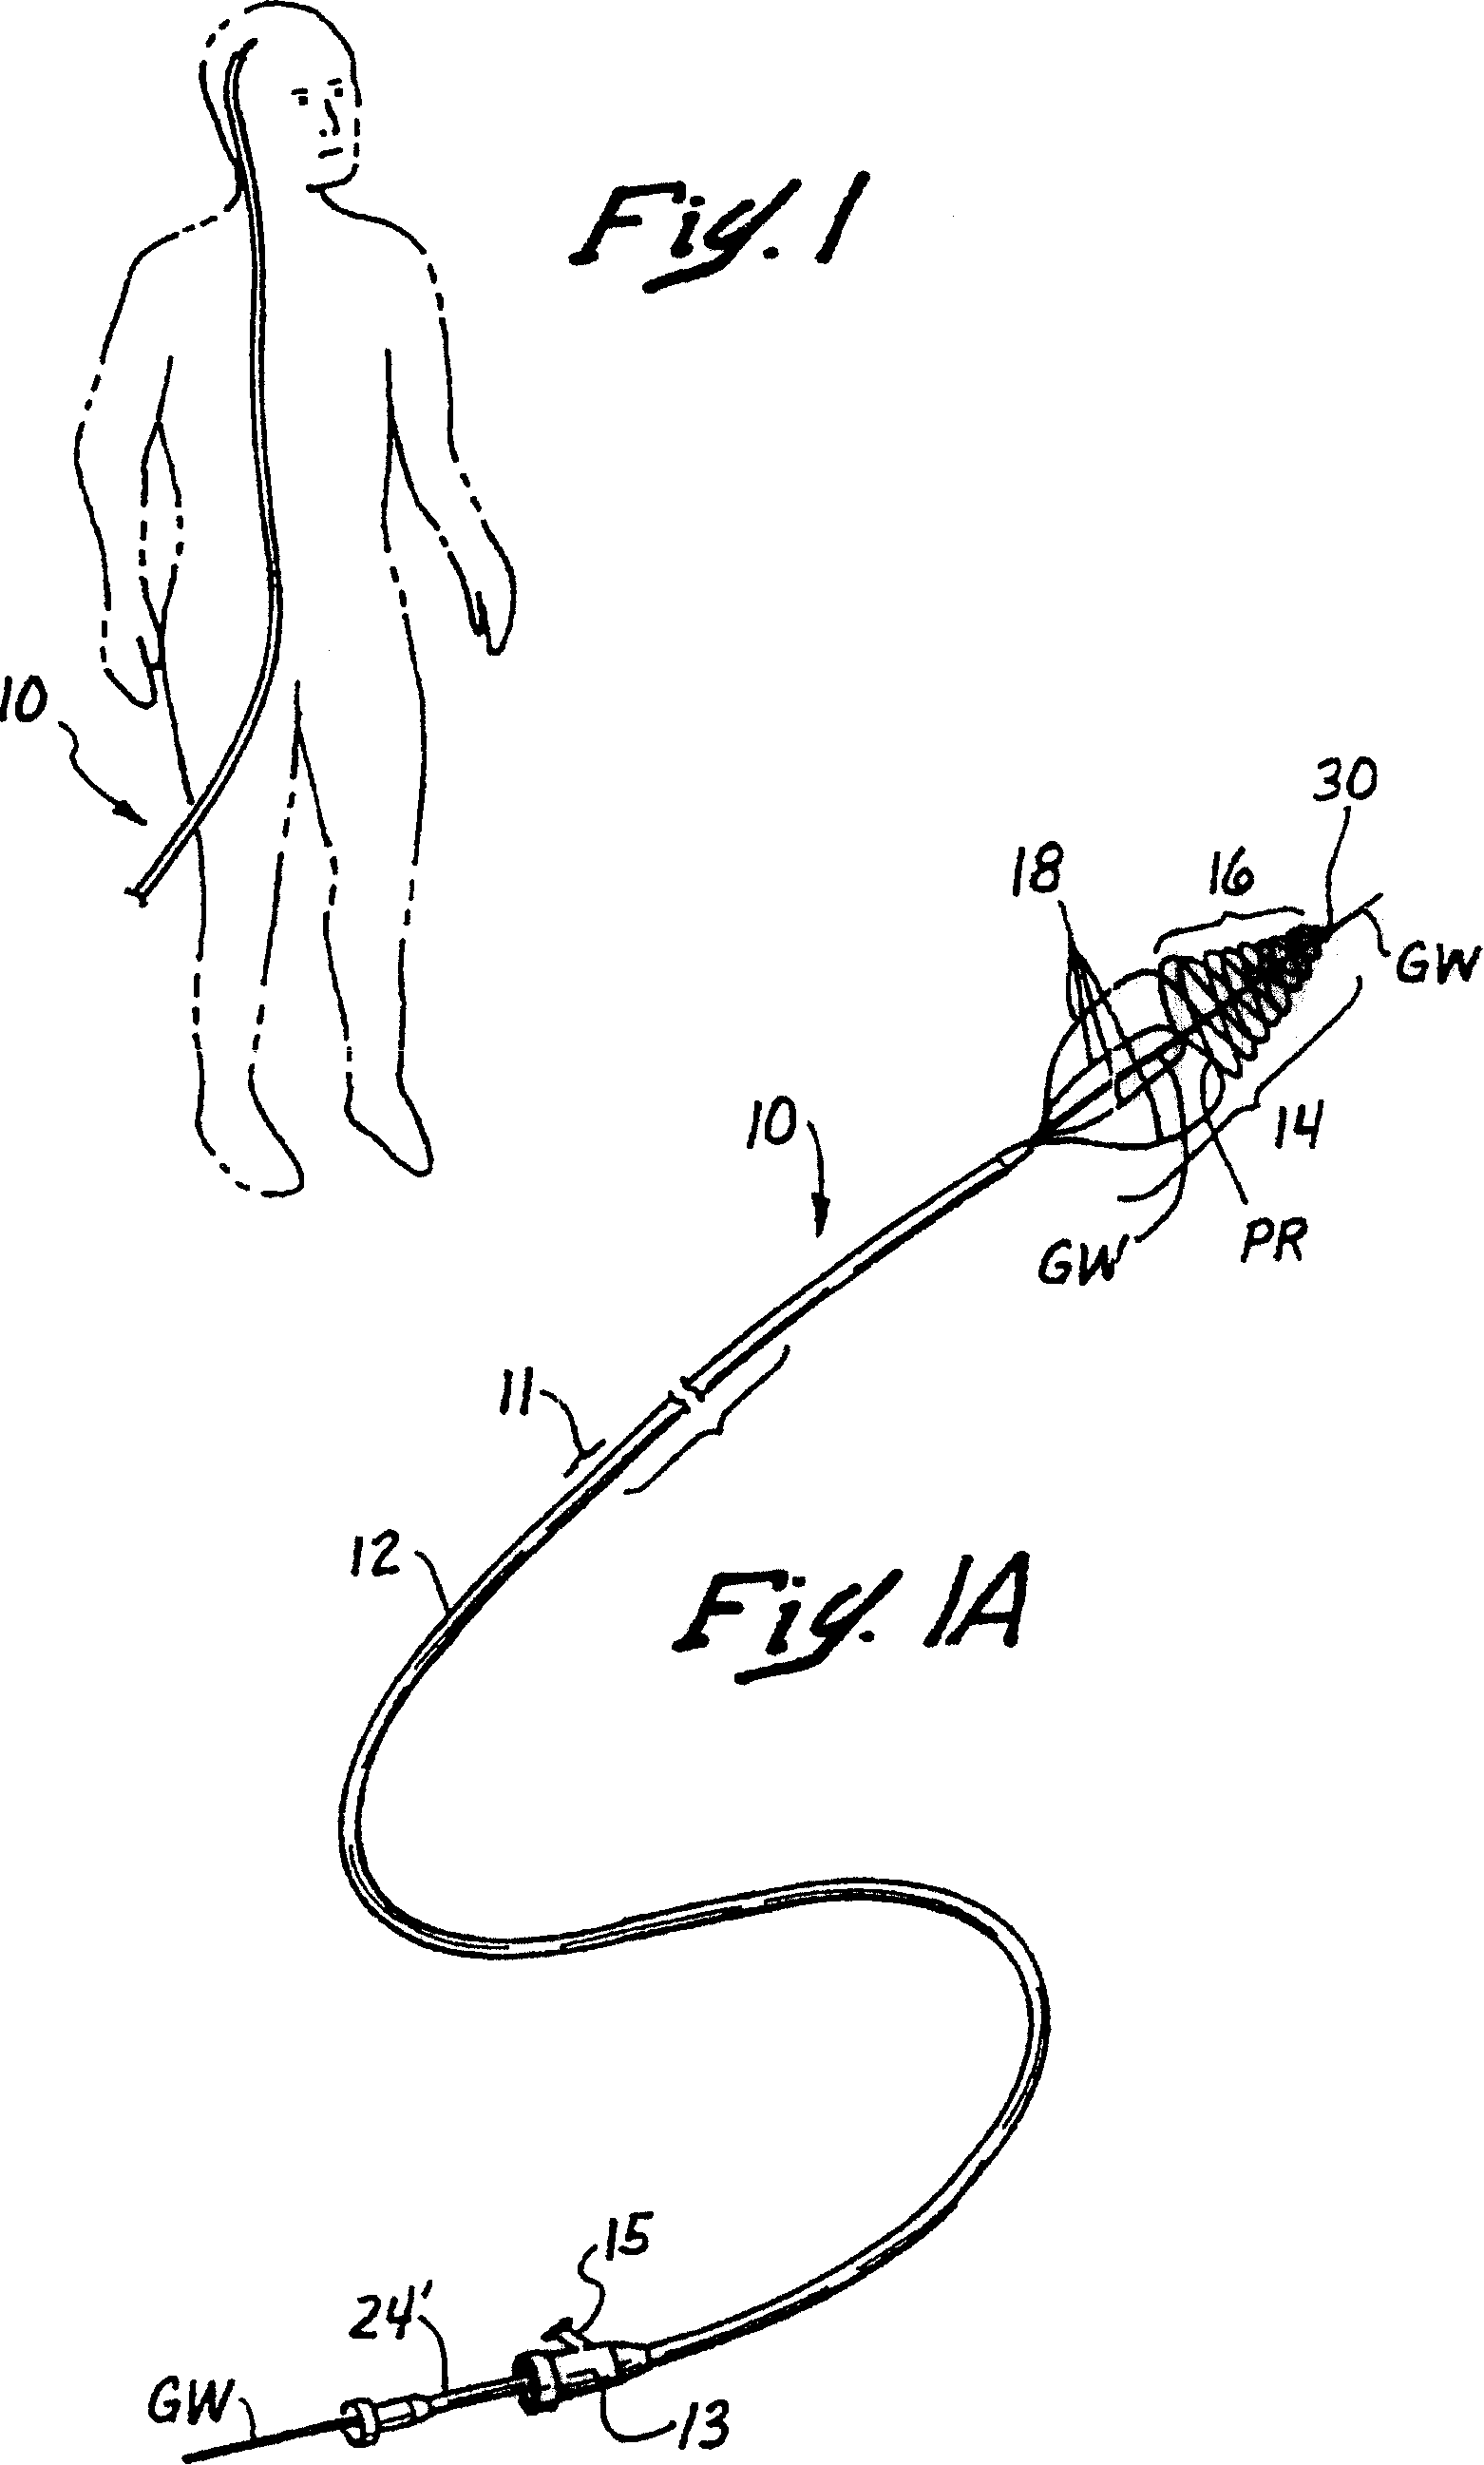 Embolectomy catheters and method for treatment